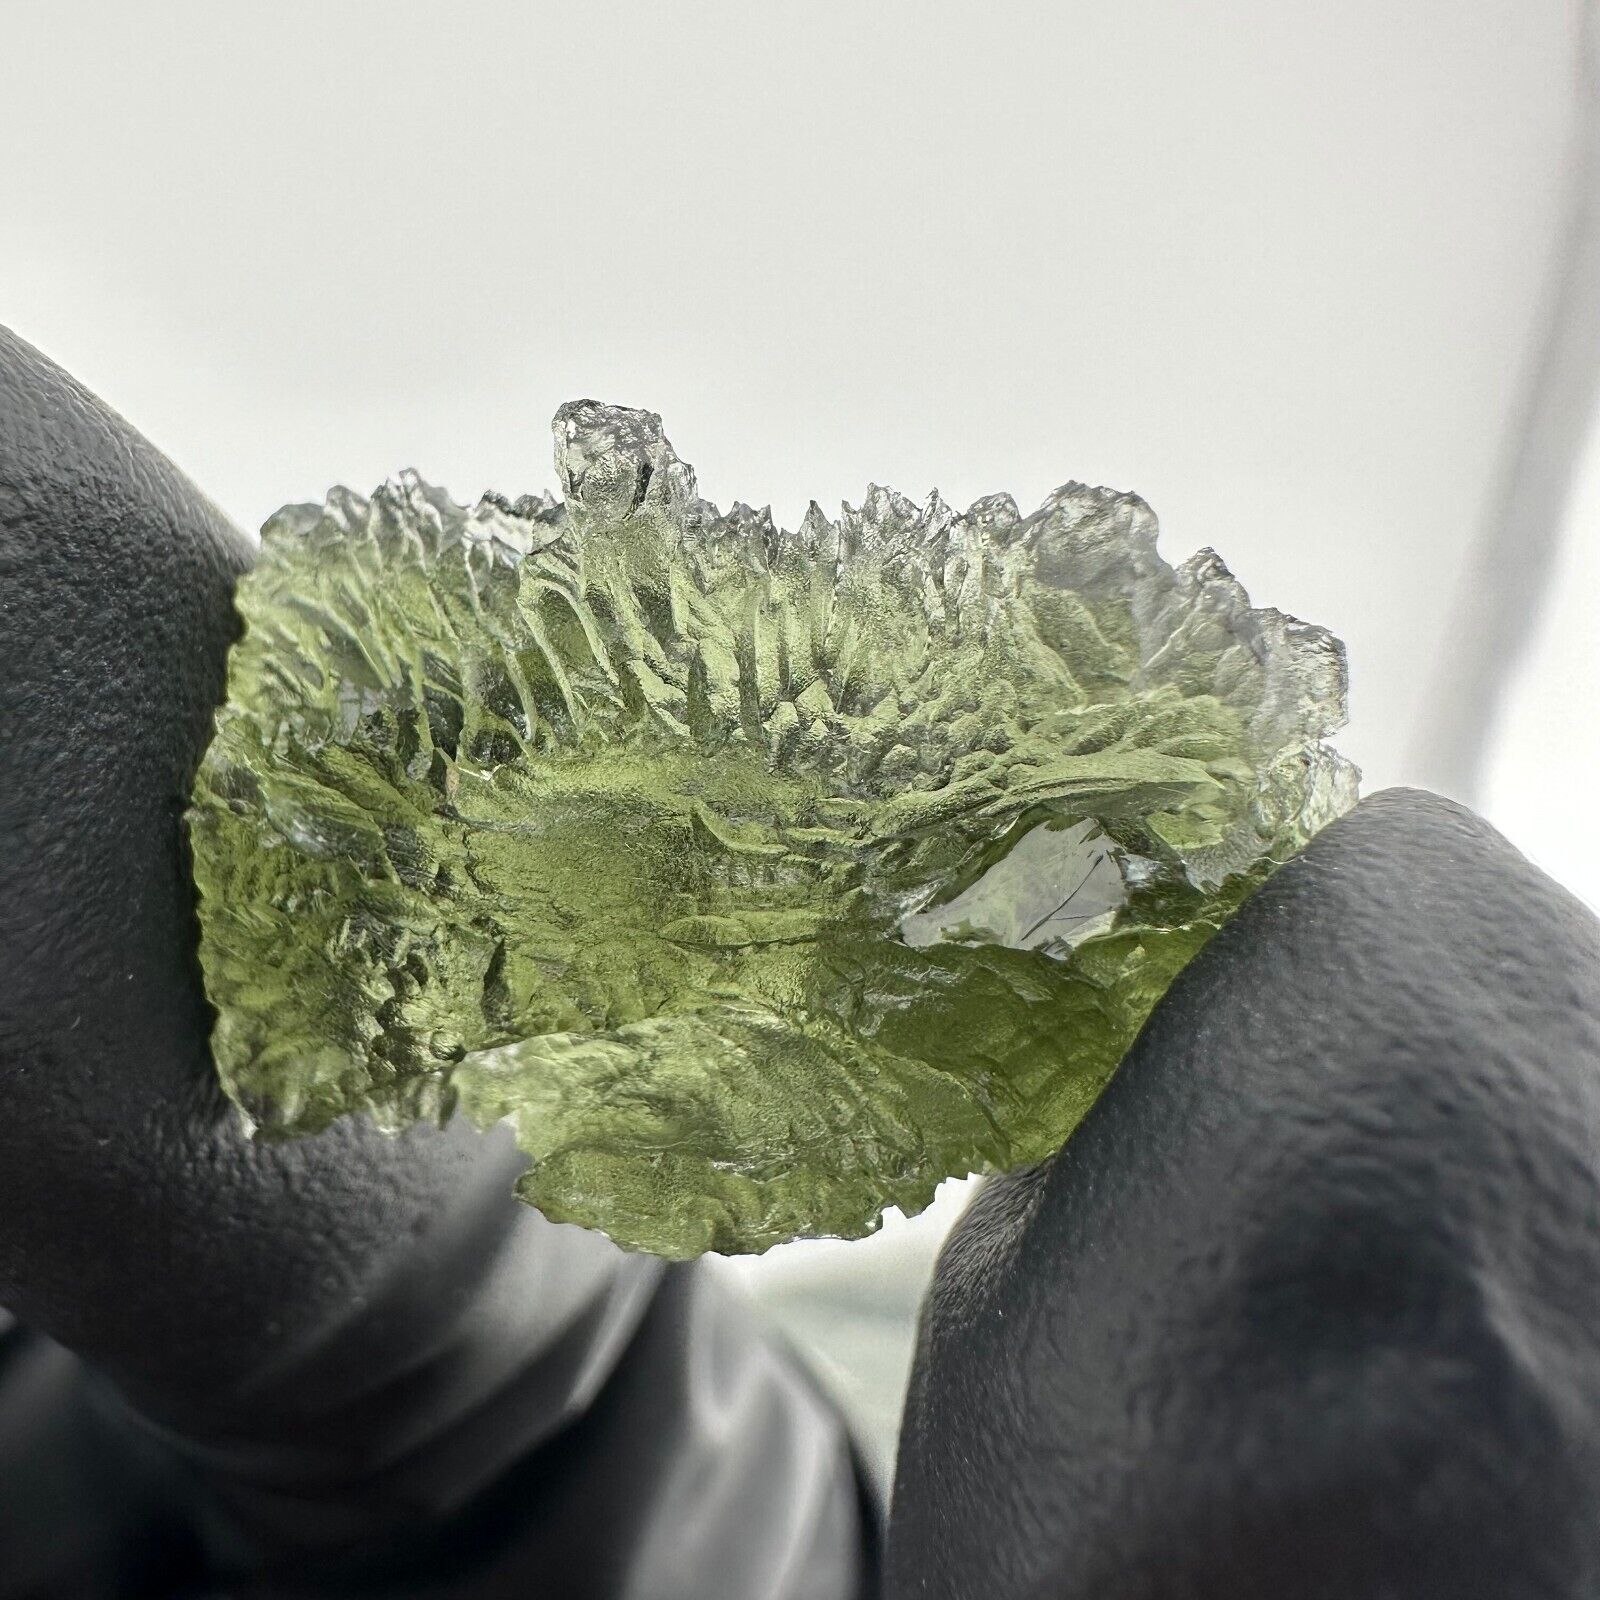 5.1g Museum Quality Moldavite from Czech Republic (CoA) Collect with Confidence